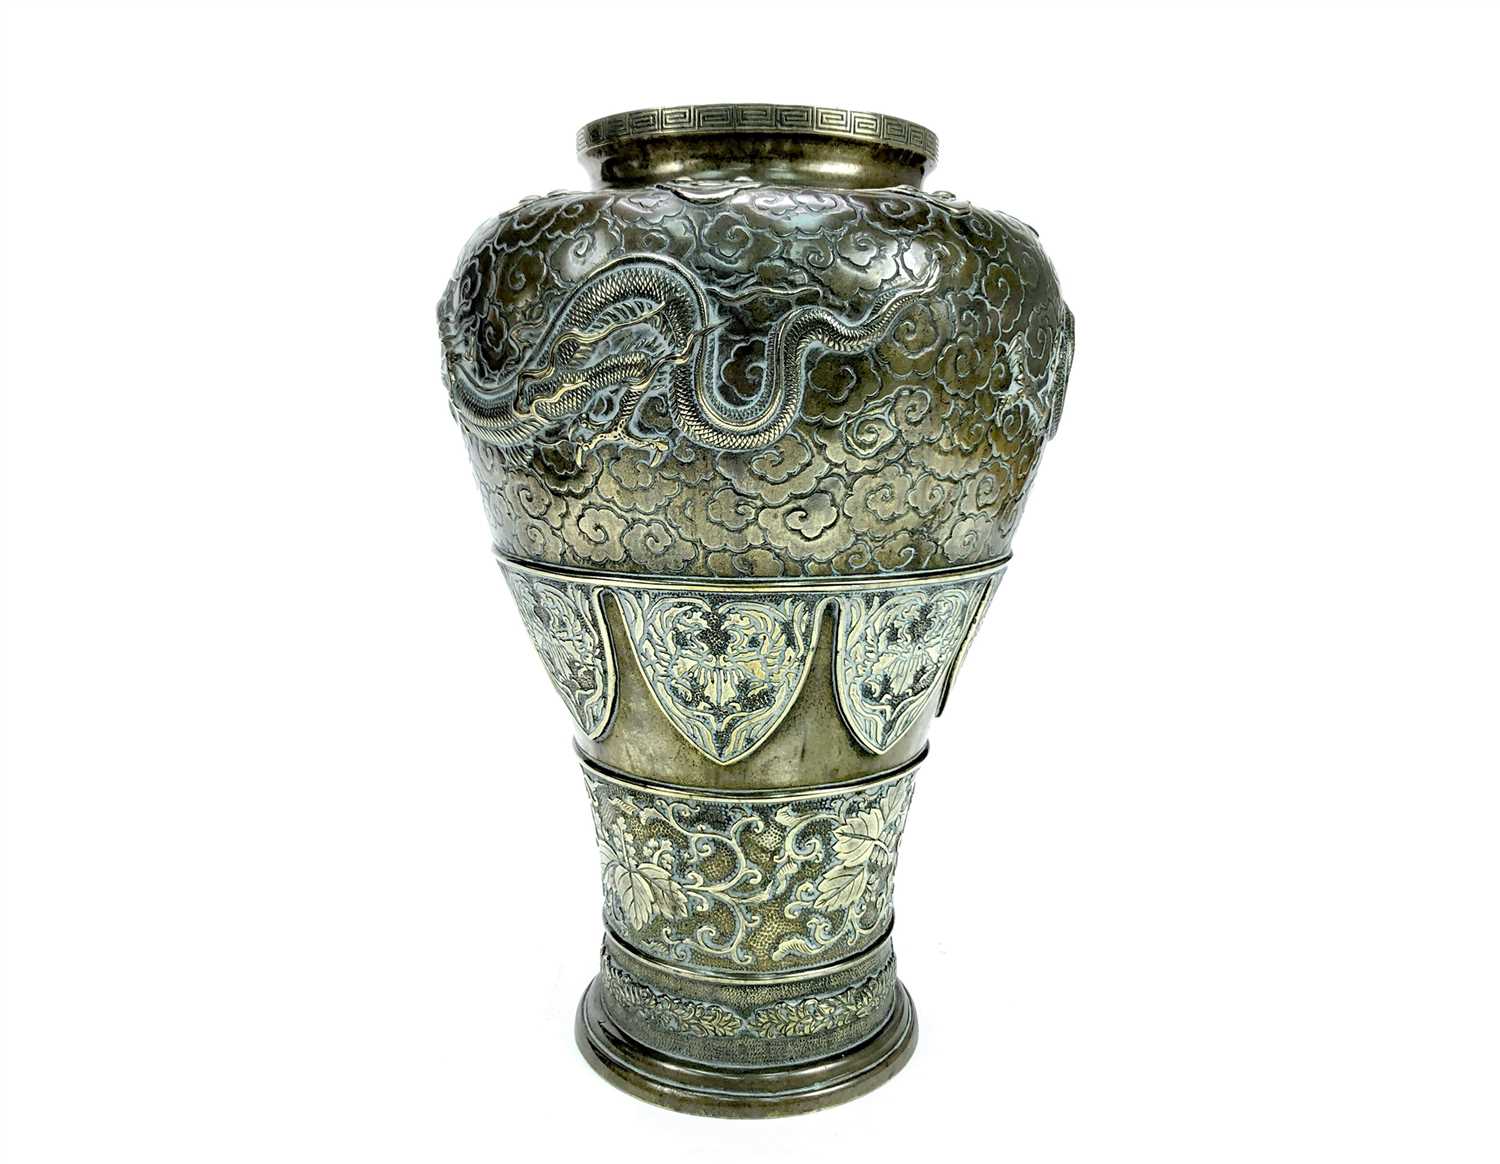 Lot 1013 - A LARGE EARLY 20TH CENTURY CHINESE BRONZE VASE